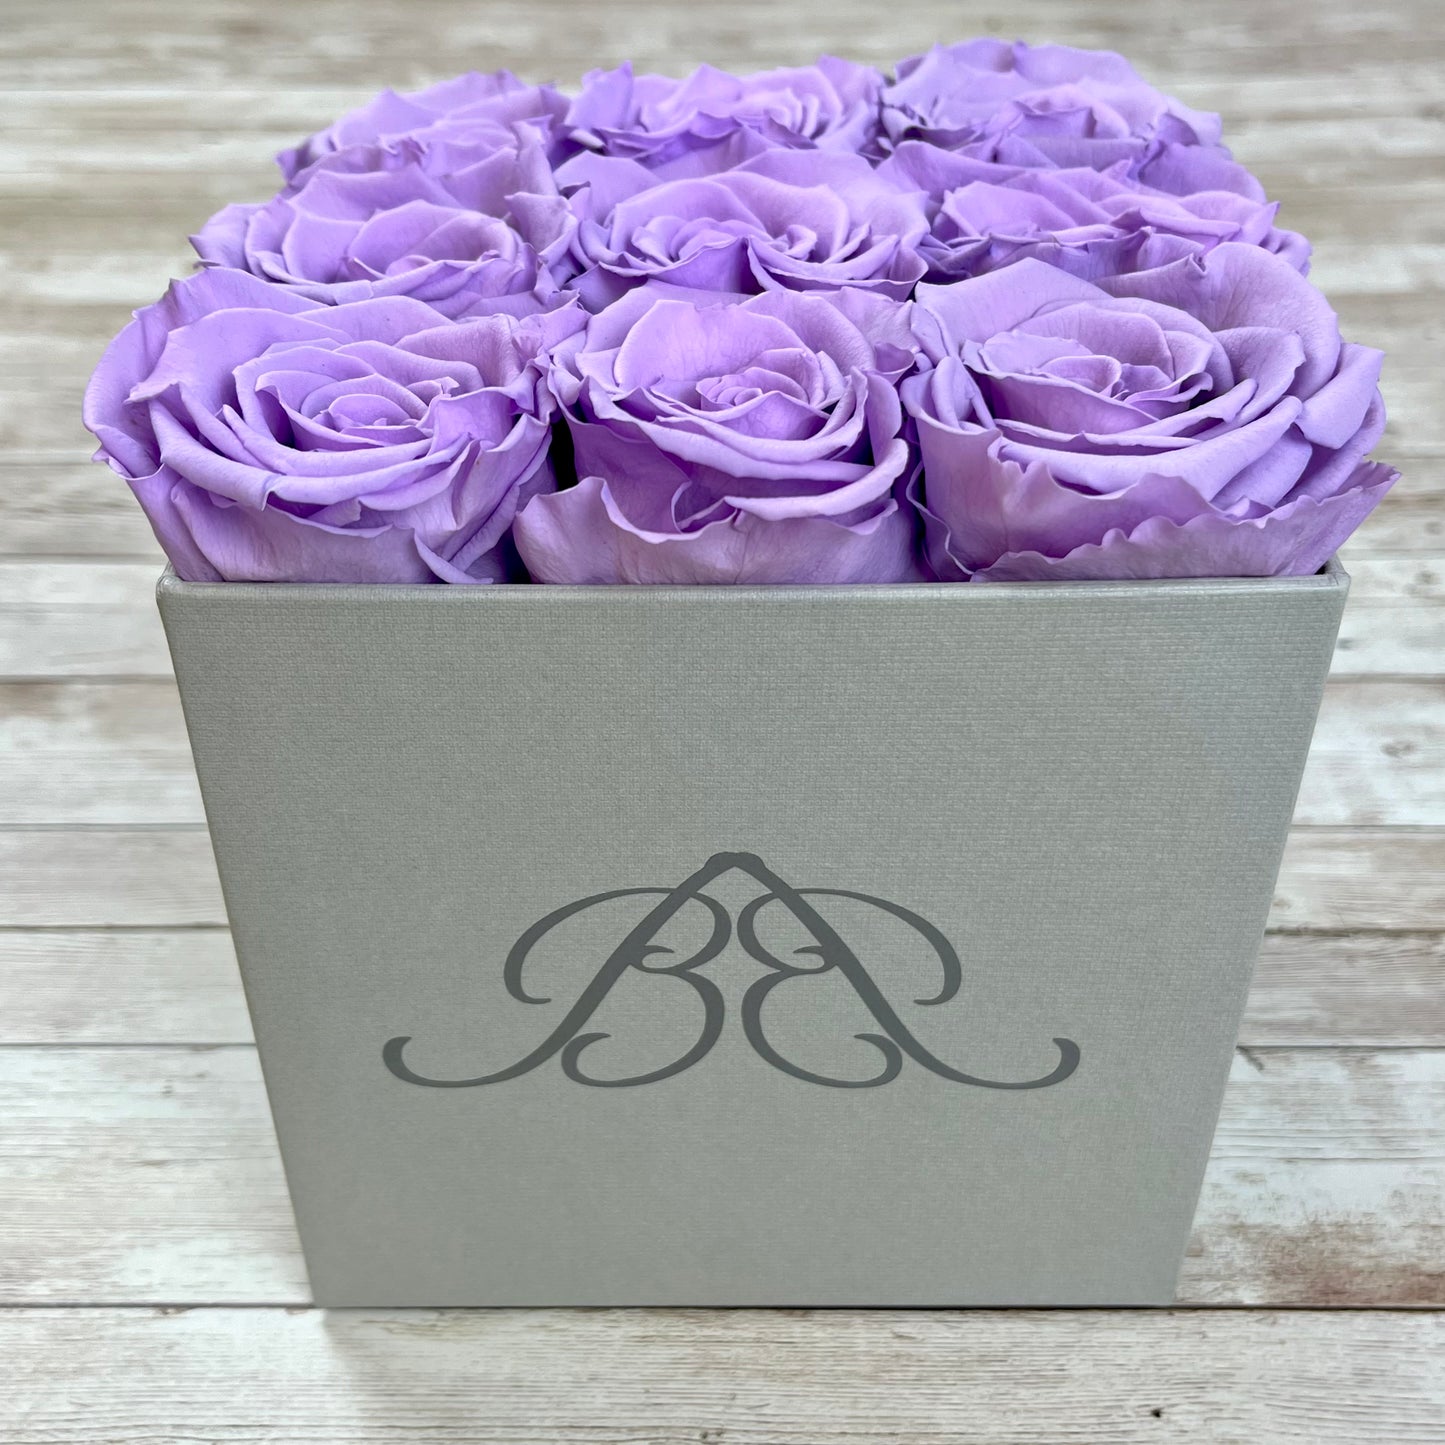 Grey Square Infinity Rose Box - Infinity Roses - Lavender One Year Roses - Square Box of Roses - Rose Colours divider-Lavender Haze